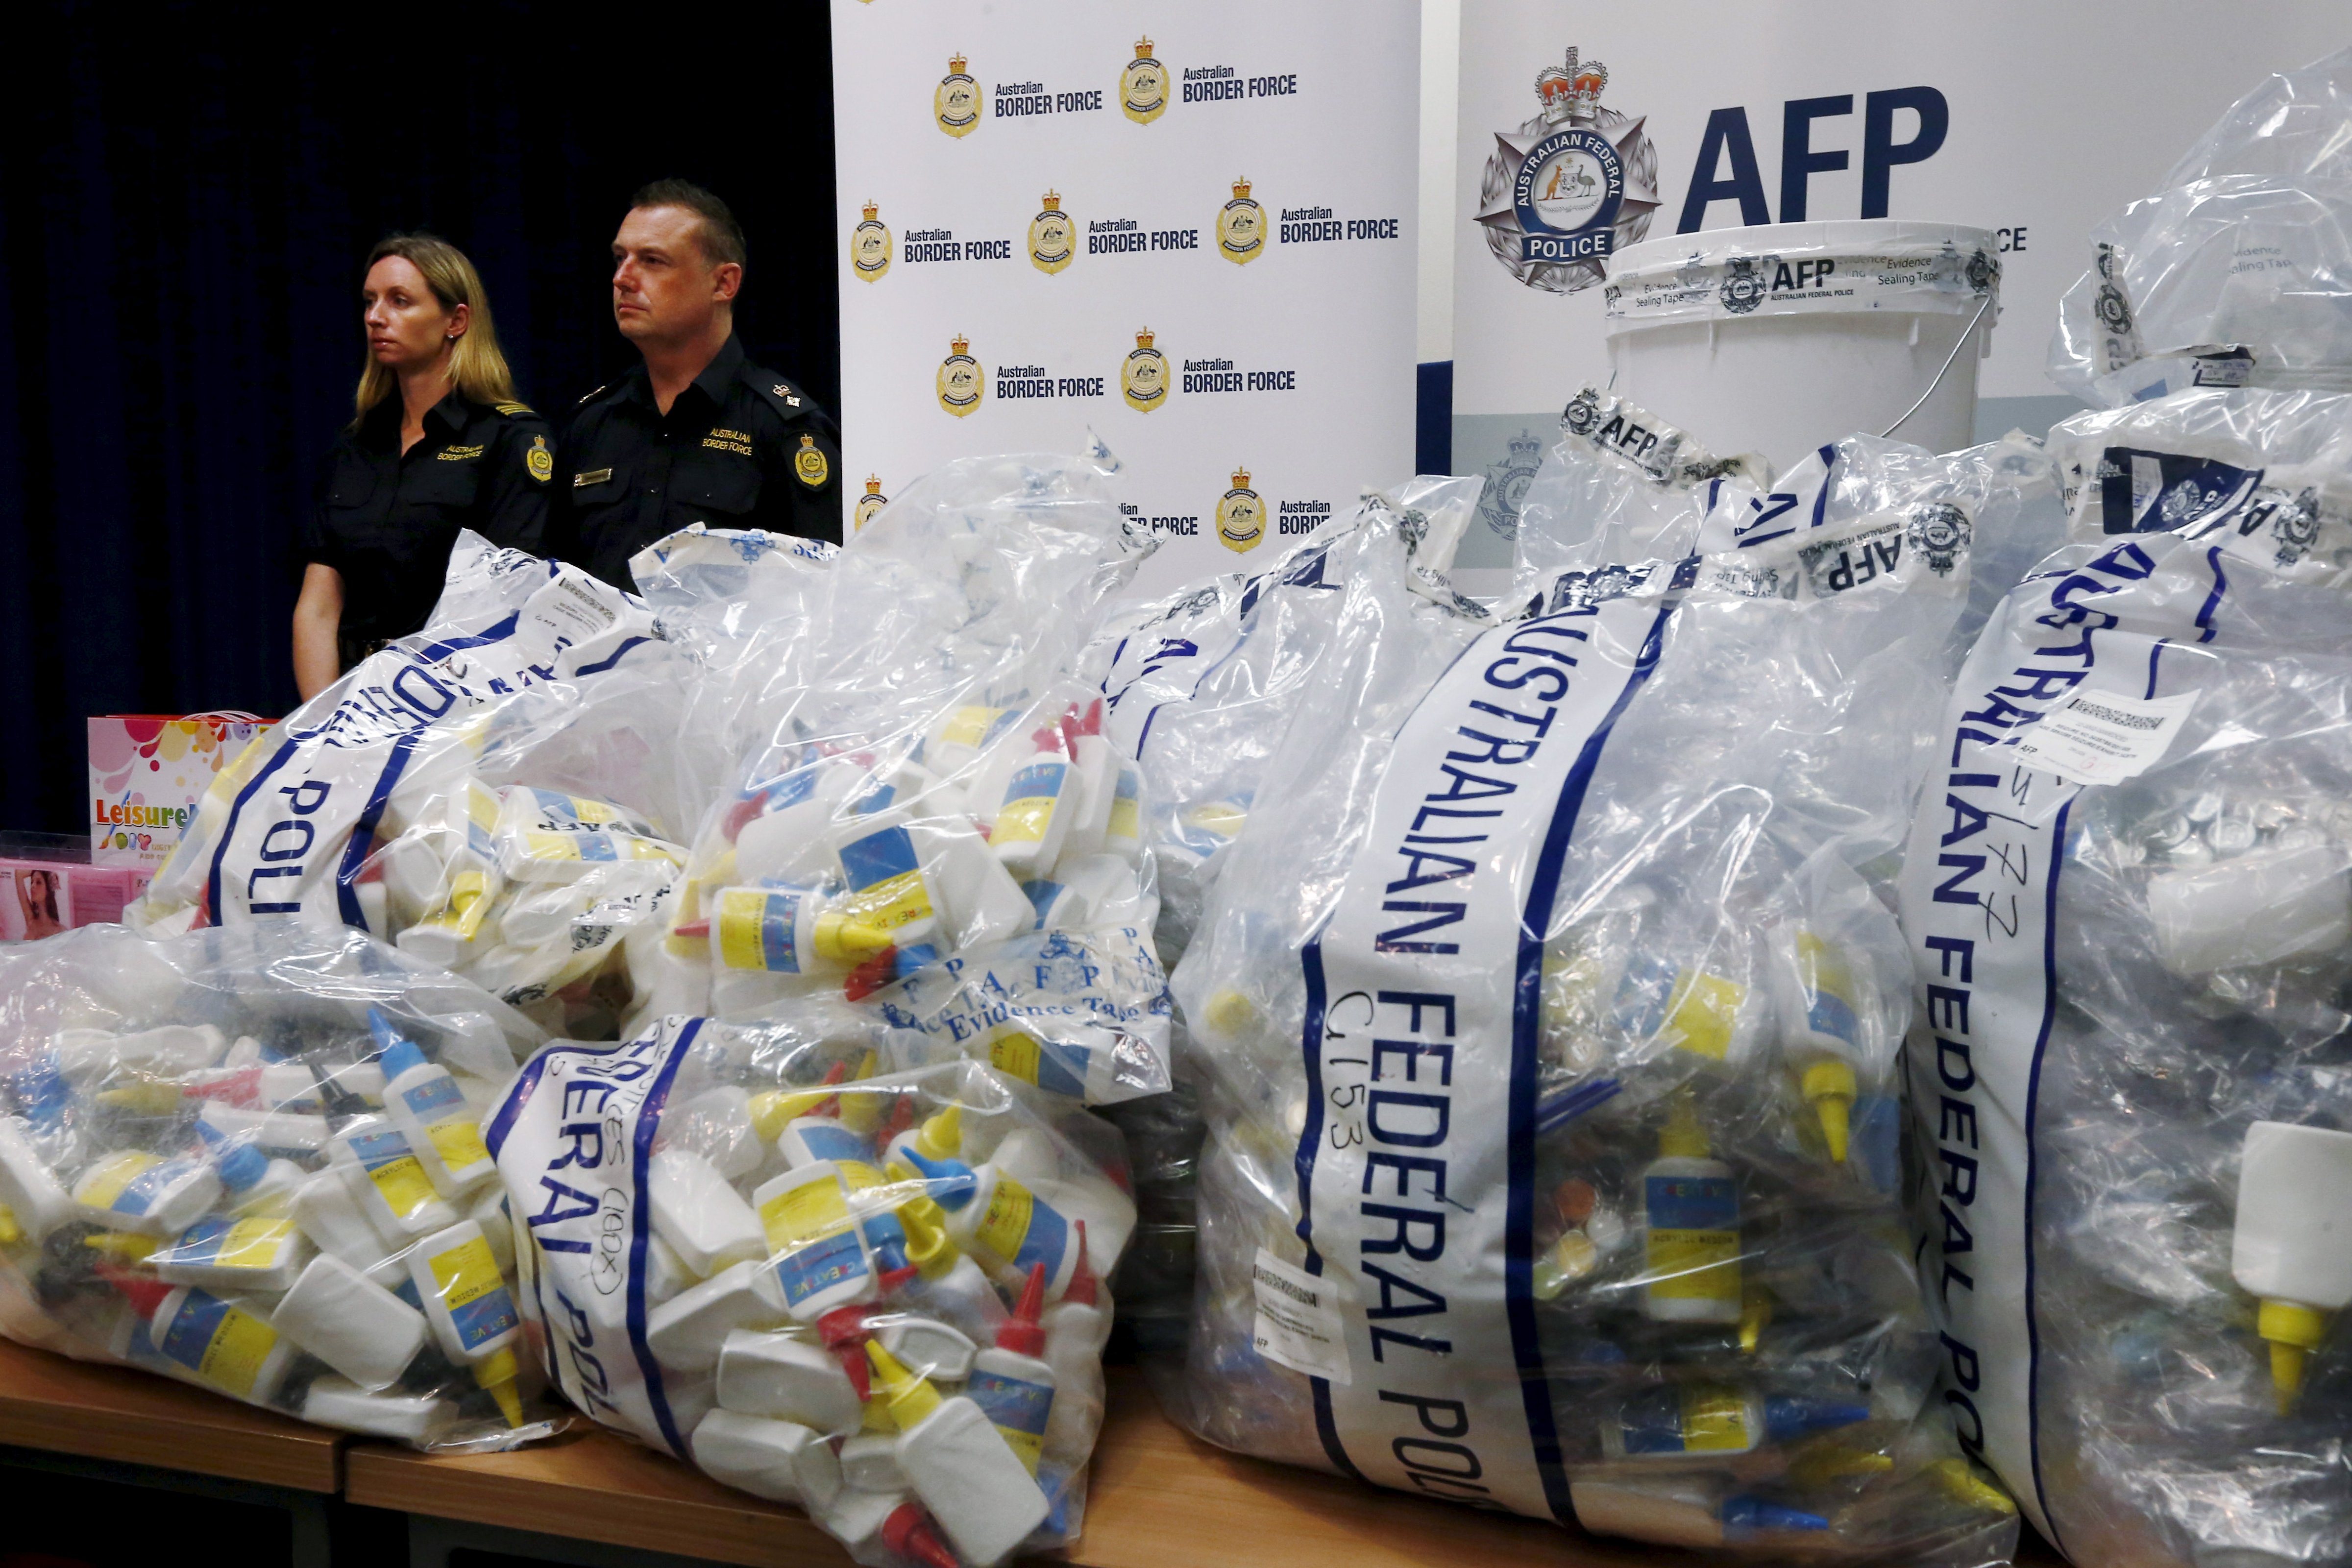 A quantity of liquid methamphetamine disguised in various packaging is put on display by Australian Border Force officers at the Australian Federal Police headquarters in Sydney